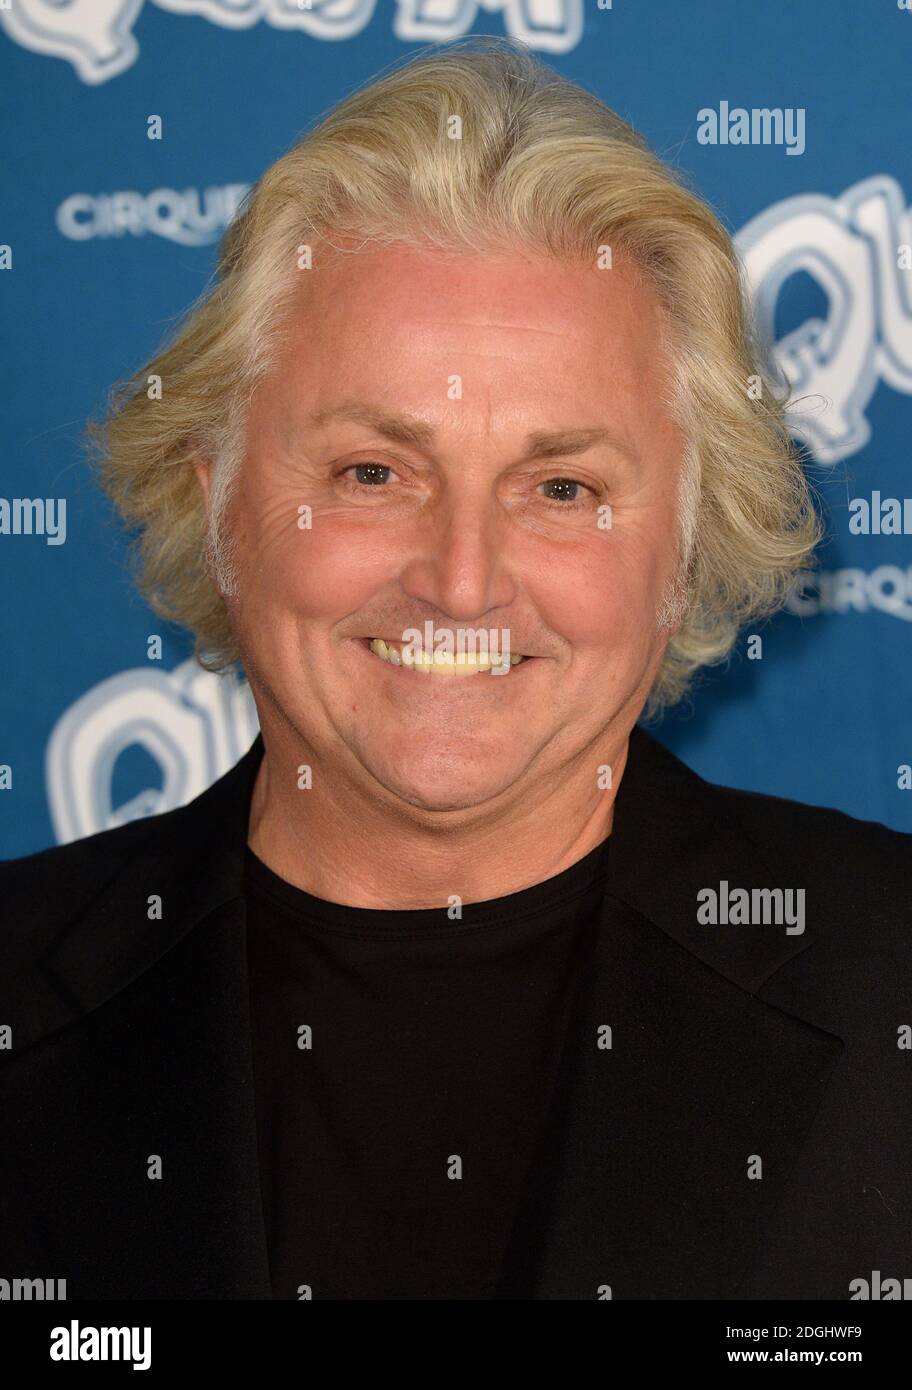 David Emanuel arriving at the opening night of Cirque du Soleil's Quidam at the Royal Albert Hall, London. Stock Photo